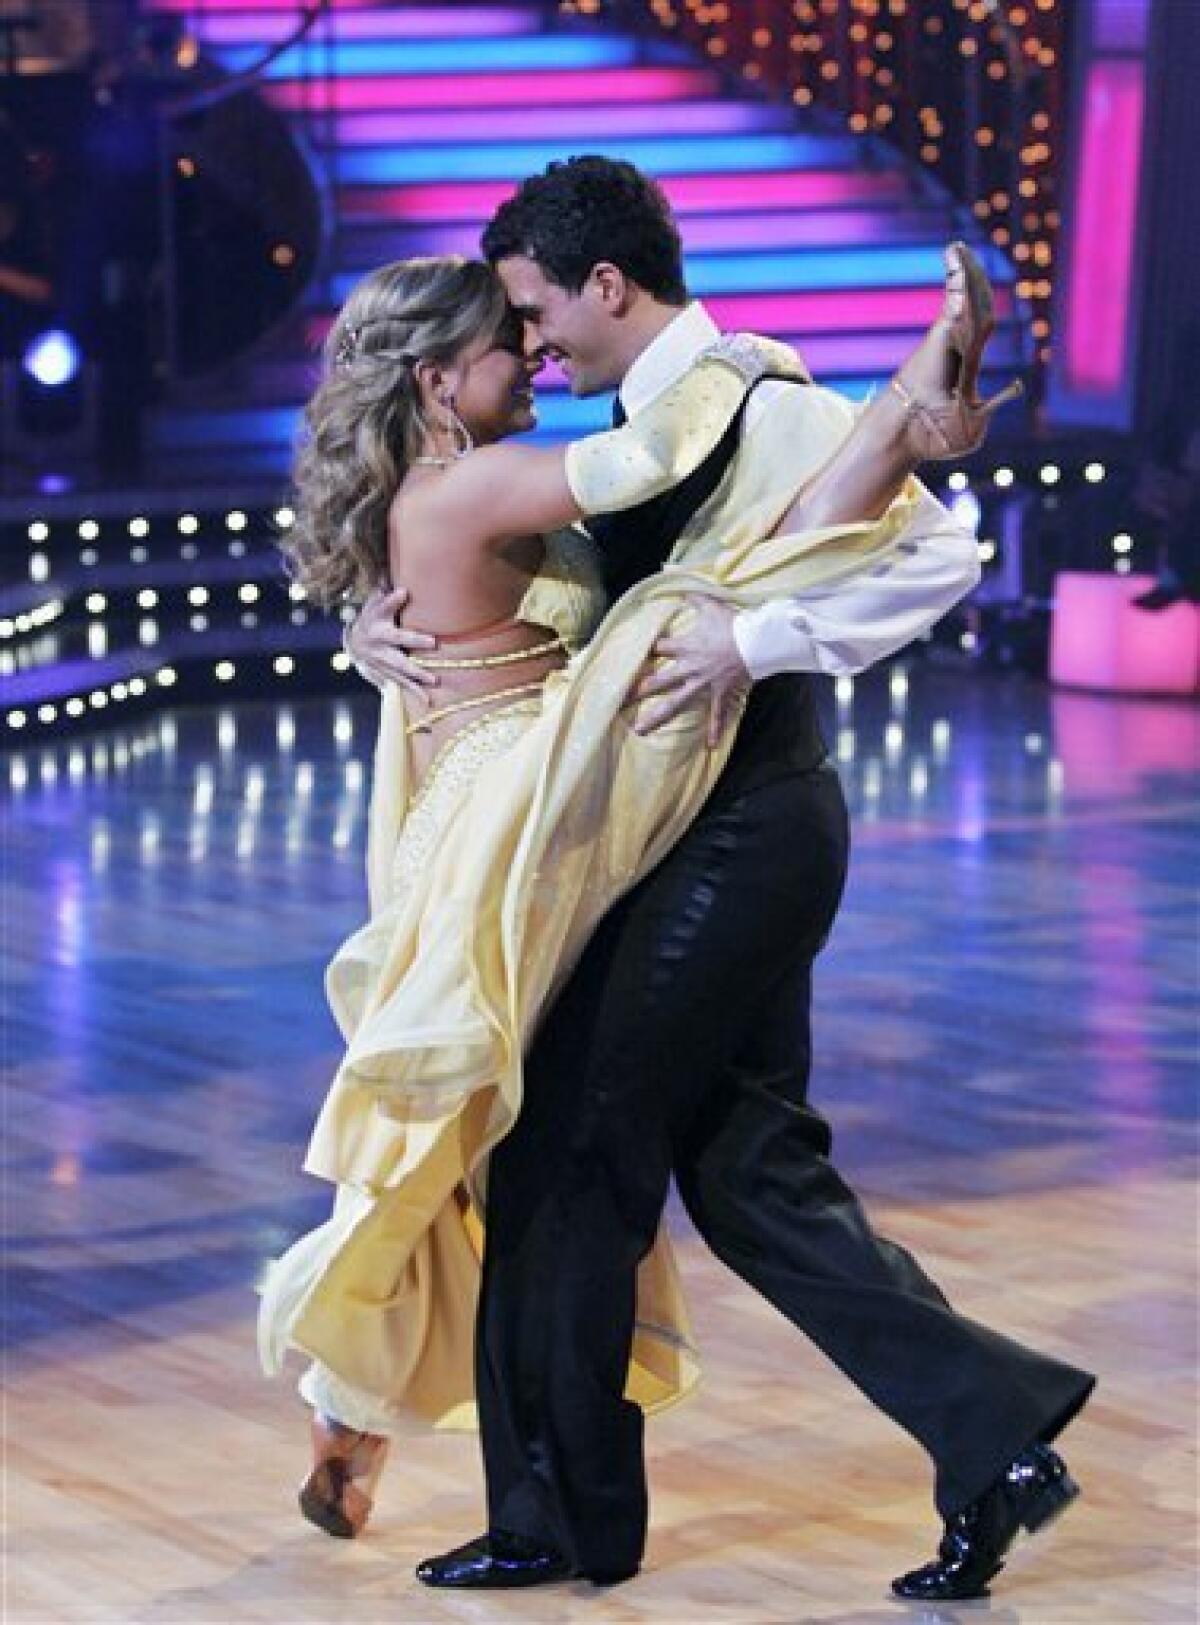 FILE - In this March 9, 2009 file photo released by ABC, Shawn Johnson, left, and her partner Mark Ballas perform on "Dancing with the Stars," in Los Angeles. A reader-submitted question about how the show's celebrity contestants and professional dancers are paid is being answered as part of an Associated Press Q&A column called "Ask AP".(AP Photo/ABC, Kelsey McNeal, File)